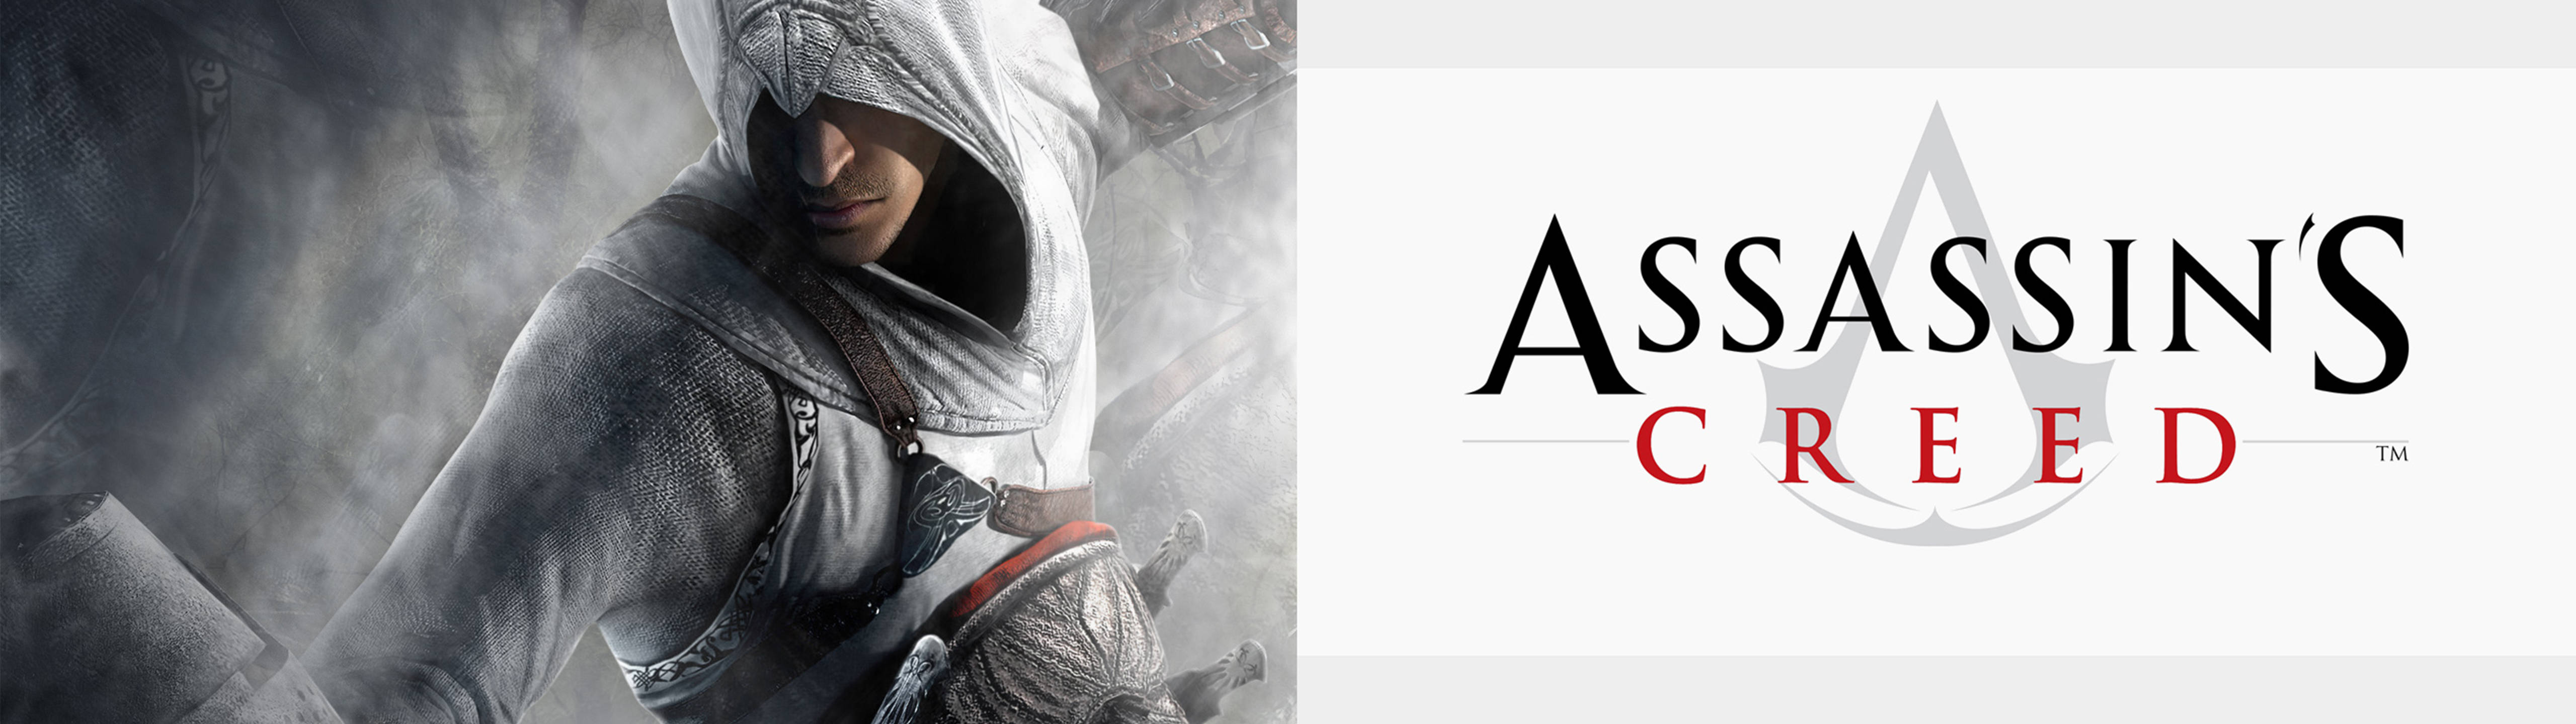 5120x1440 Game Assassin's Creed